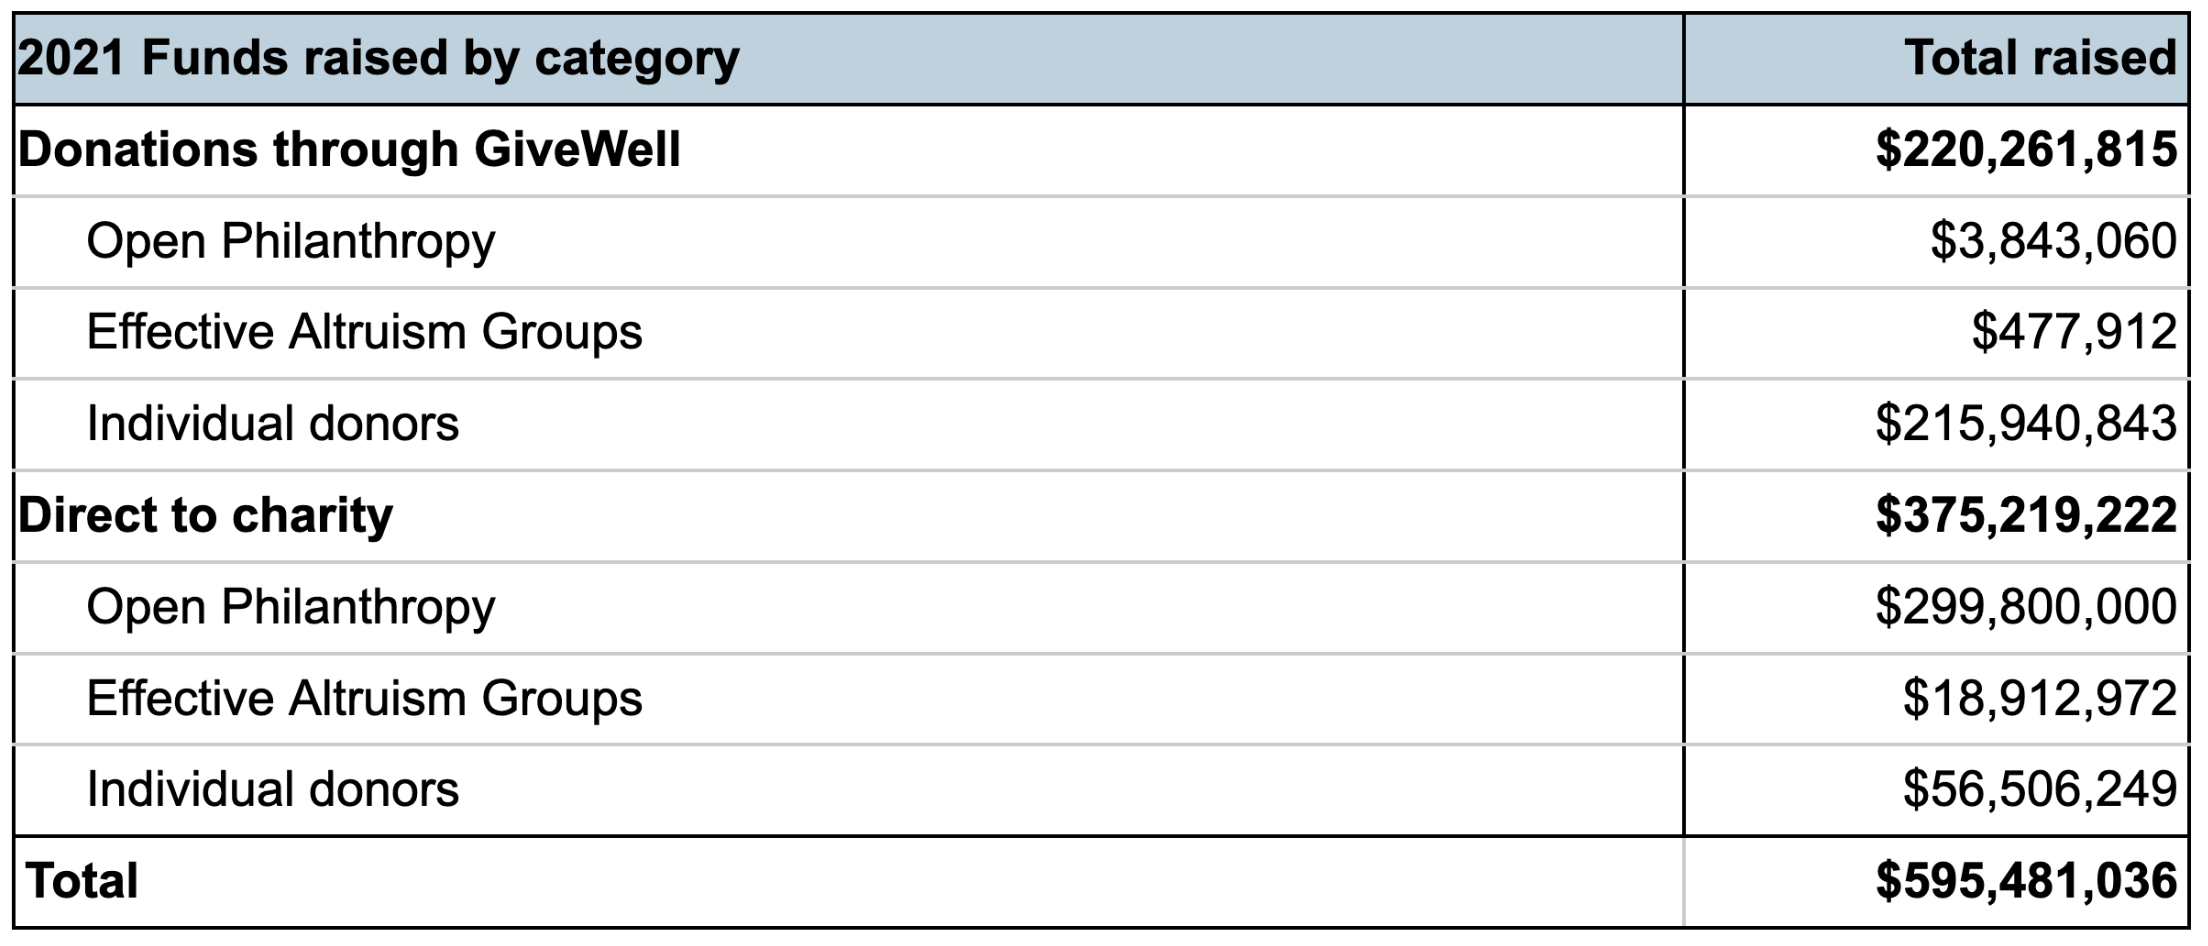 Table summarizing 2021 funds raised by category